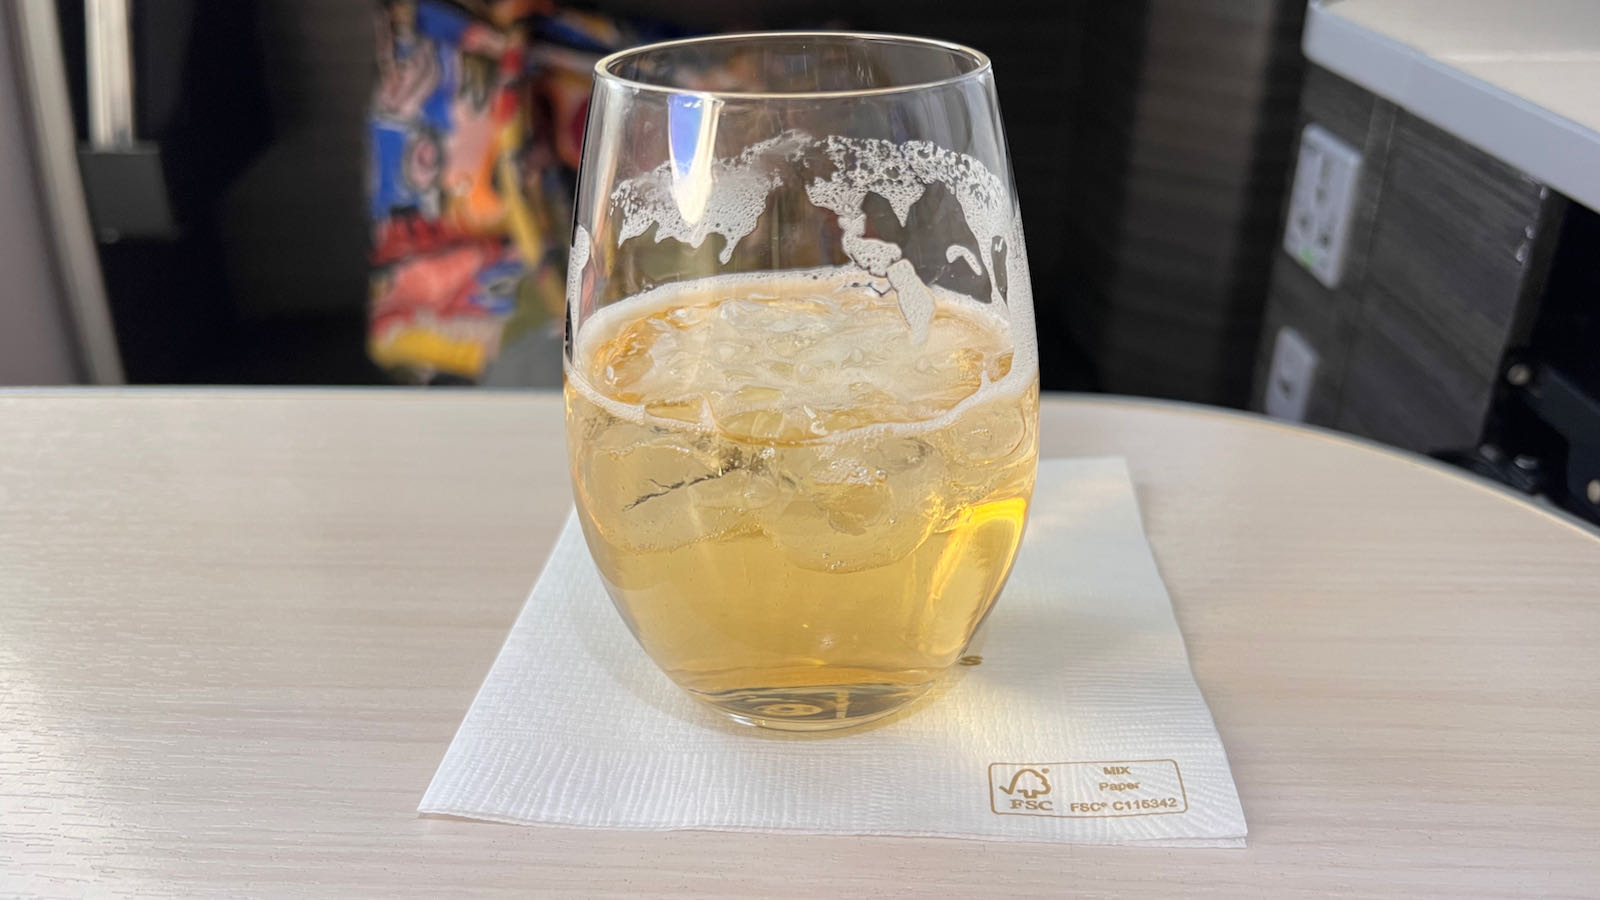 delicious plum wine in JAL Business Class